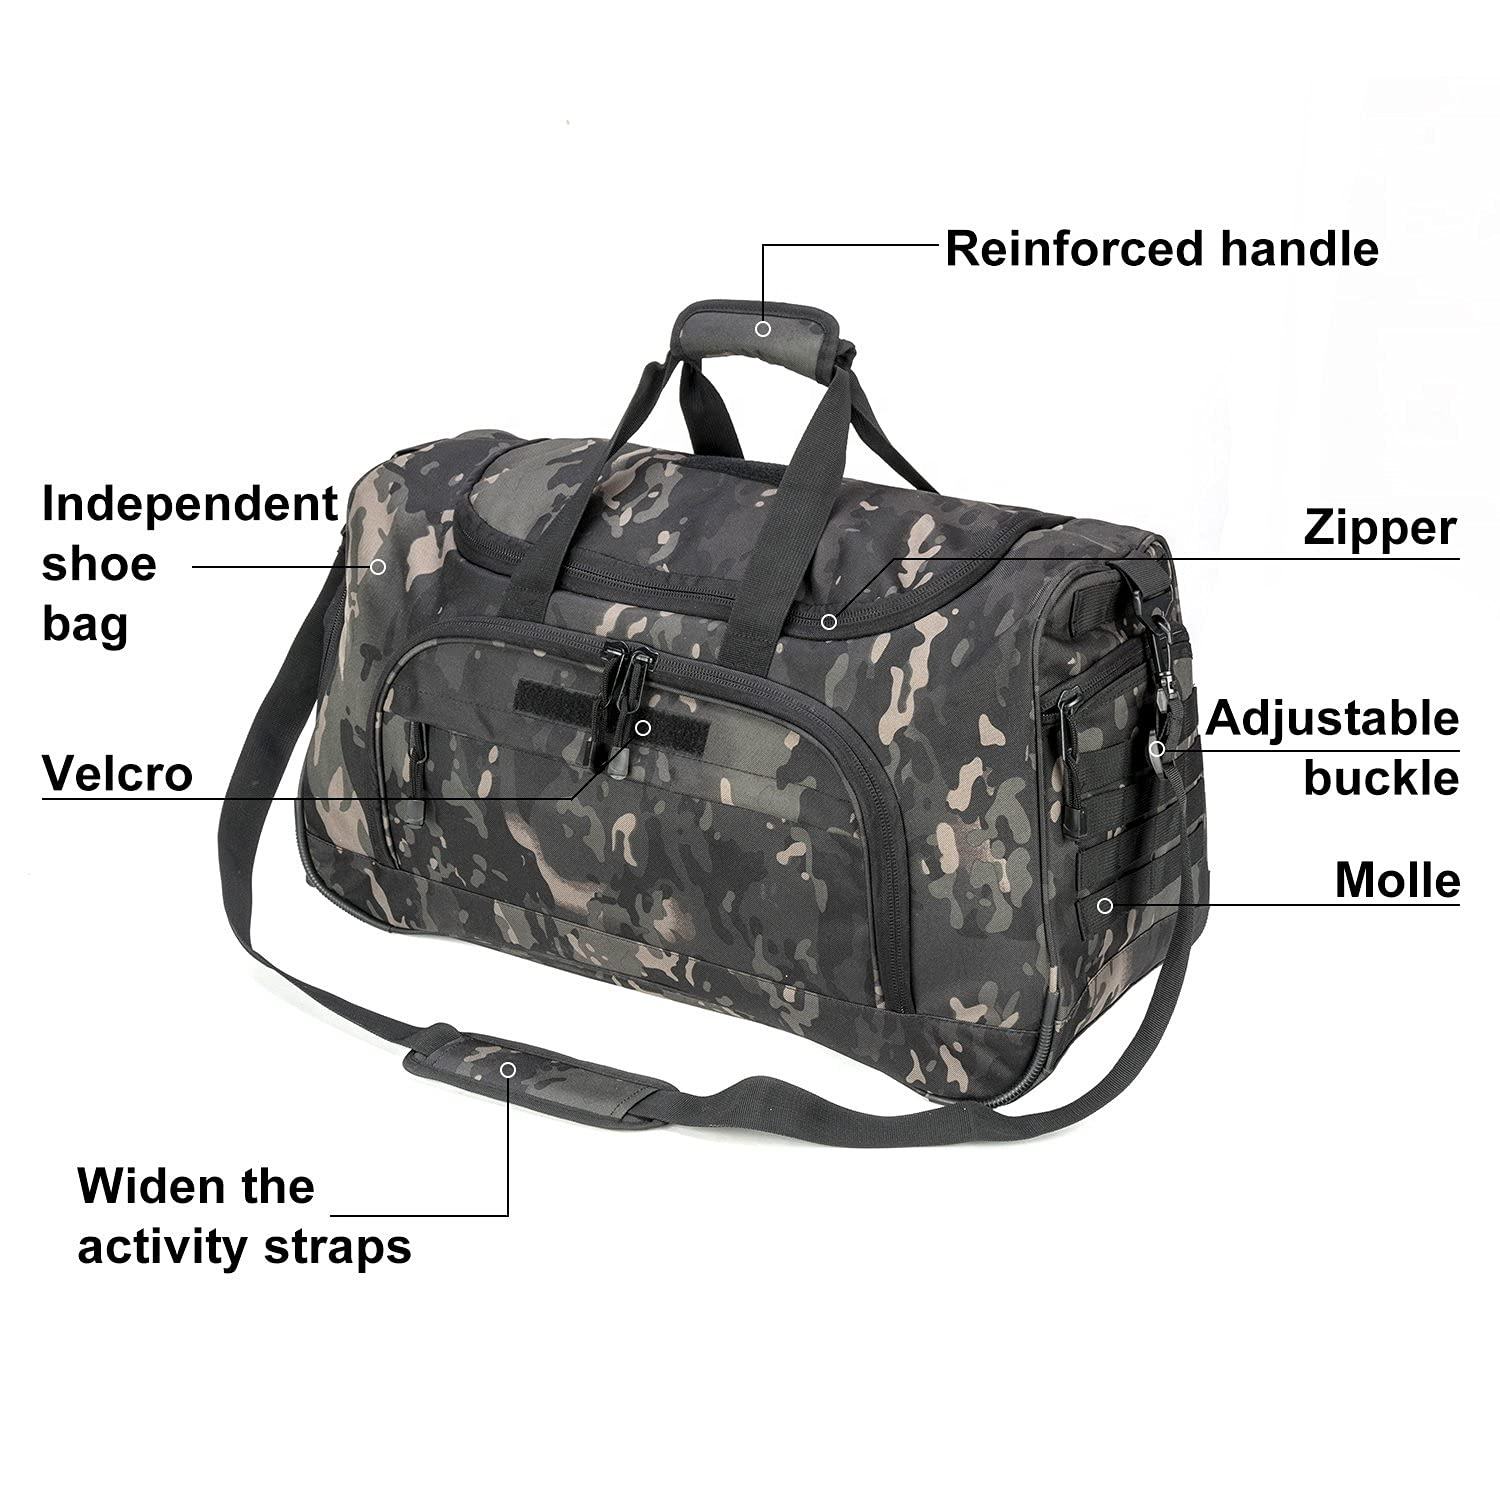 Extra Large Adjustable Strap Retro Man Sports Duffle Bag with Shoes Compartment Travel Yoga Outdoor Sports Bag